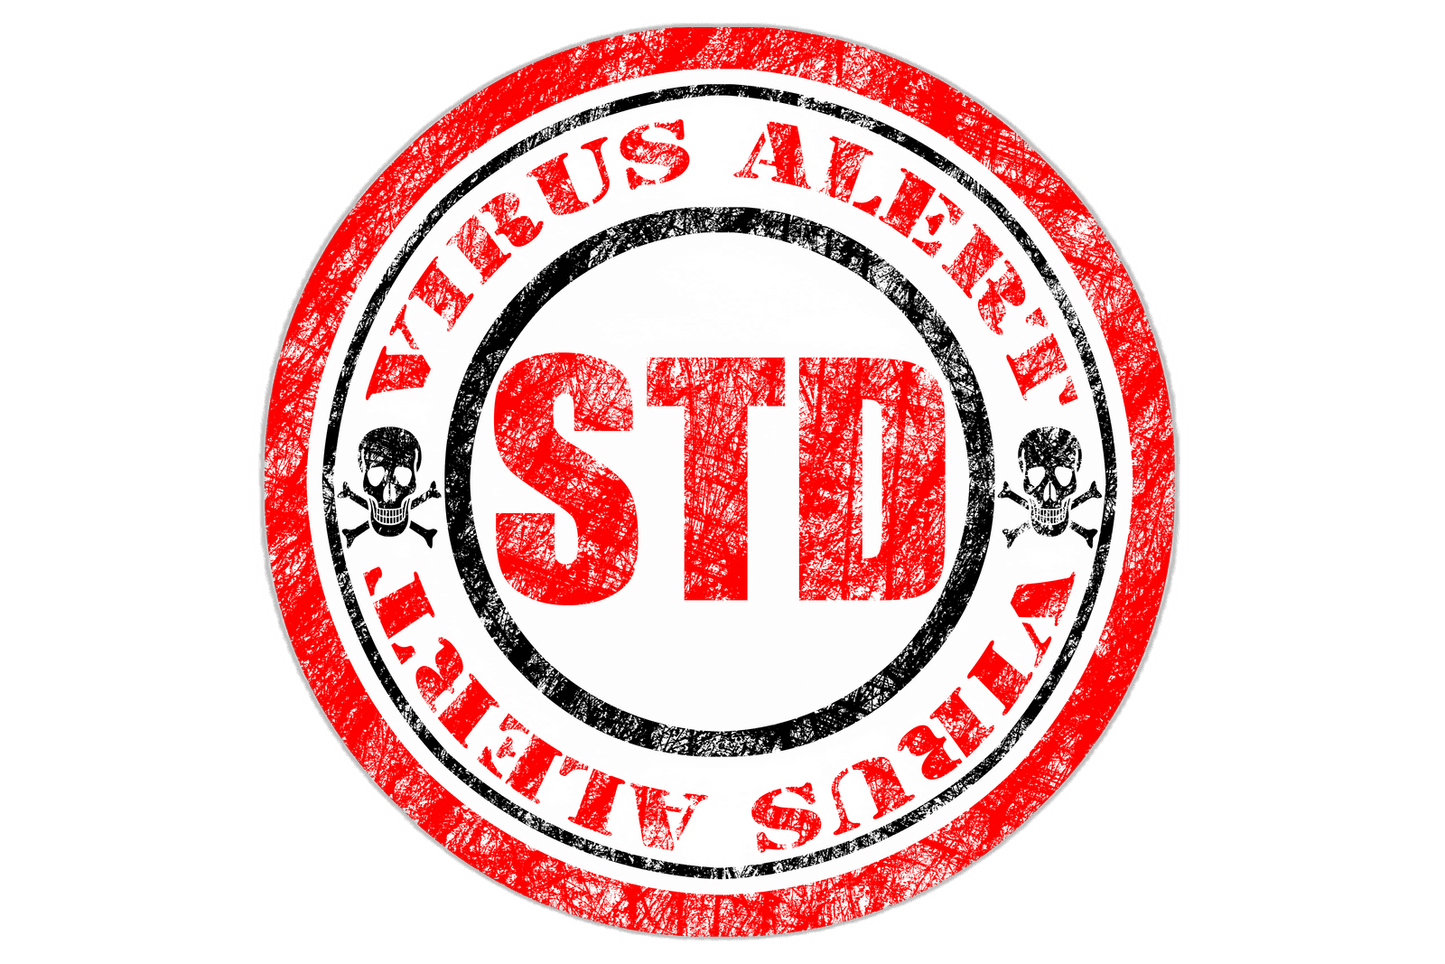 STD Profile (Sexually Transmitted Diseases) - healthcare nt sickcare